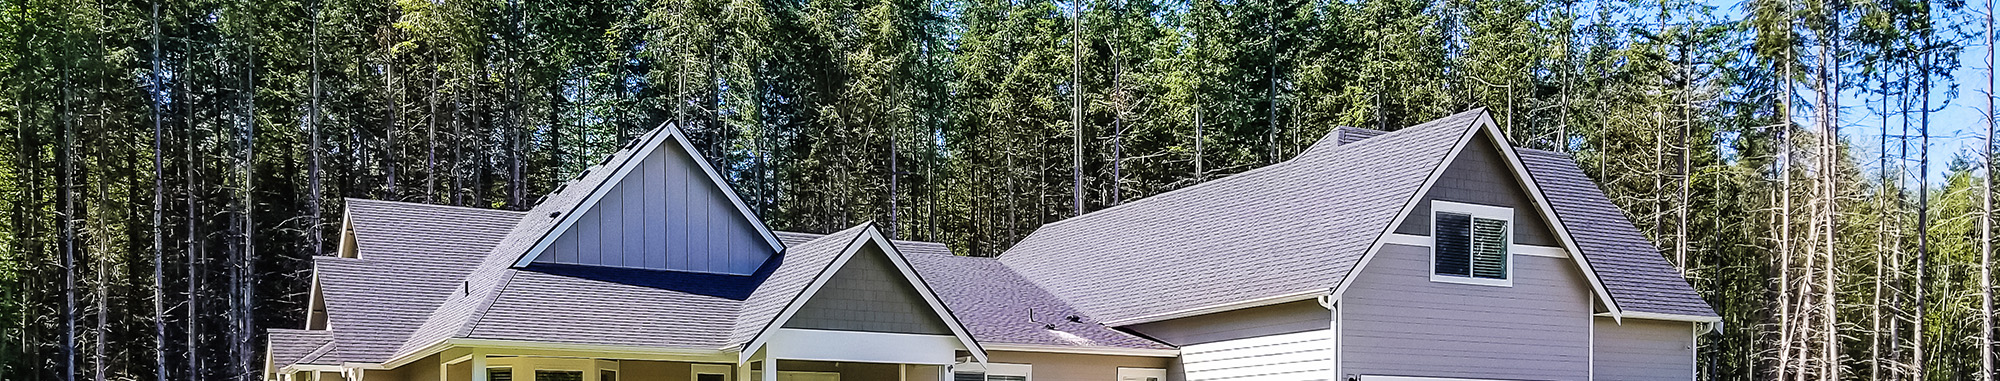 Best roofers in Franklin, WI